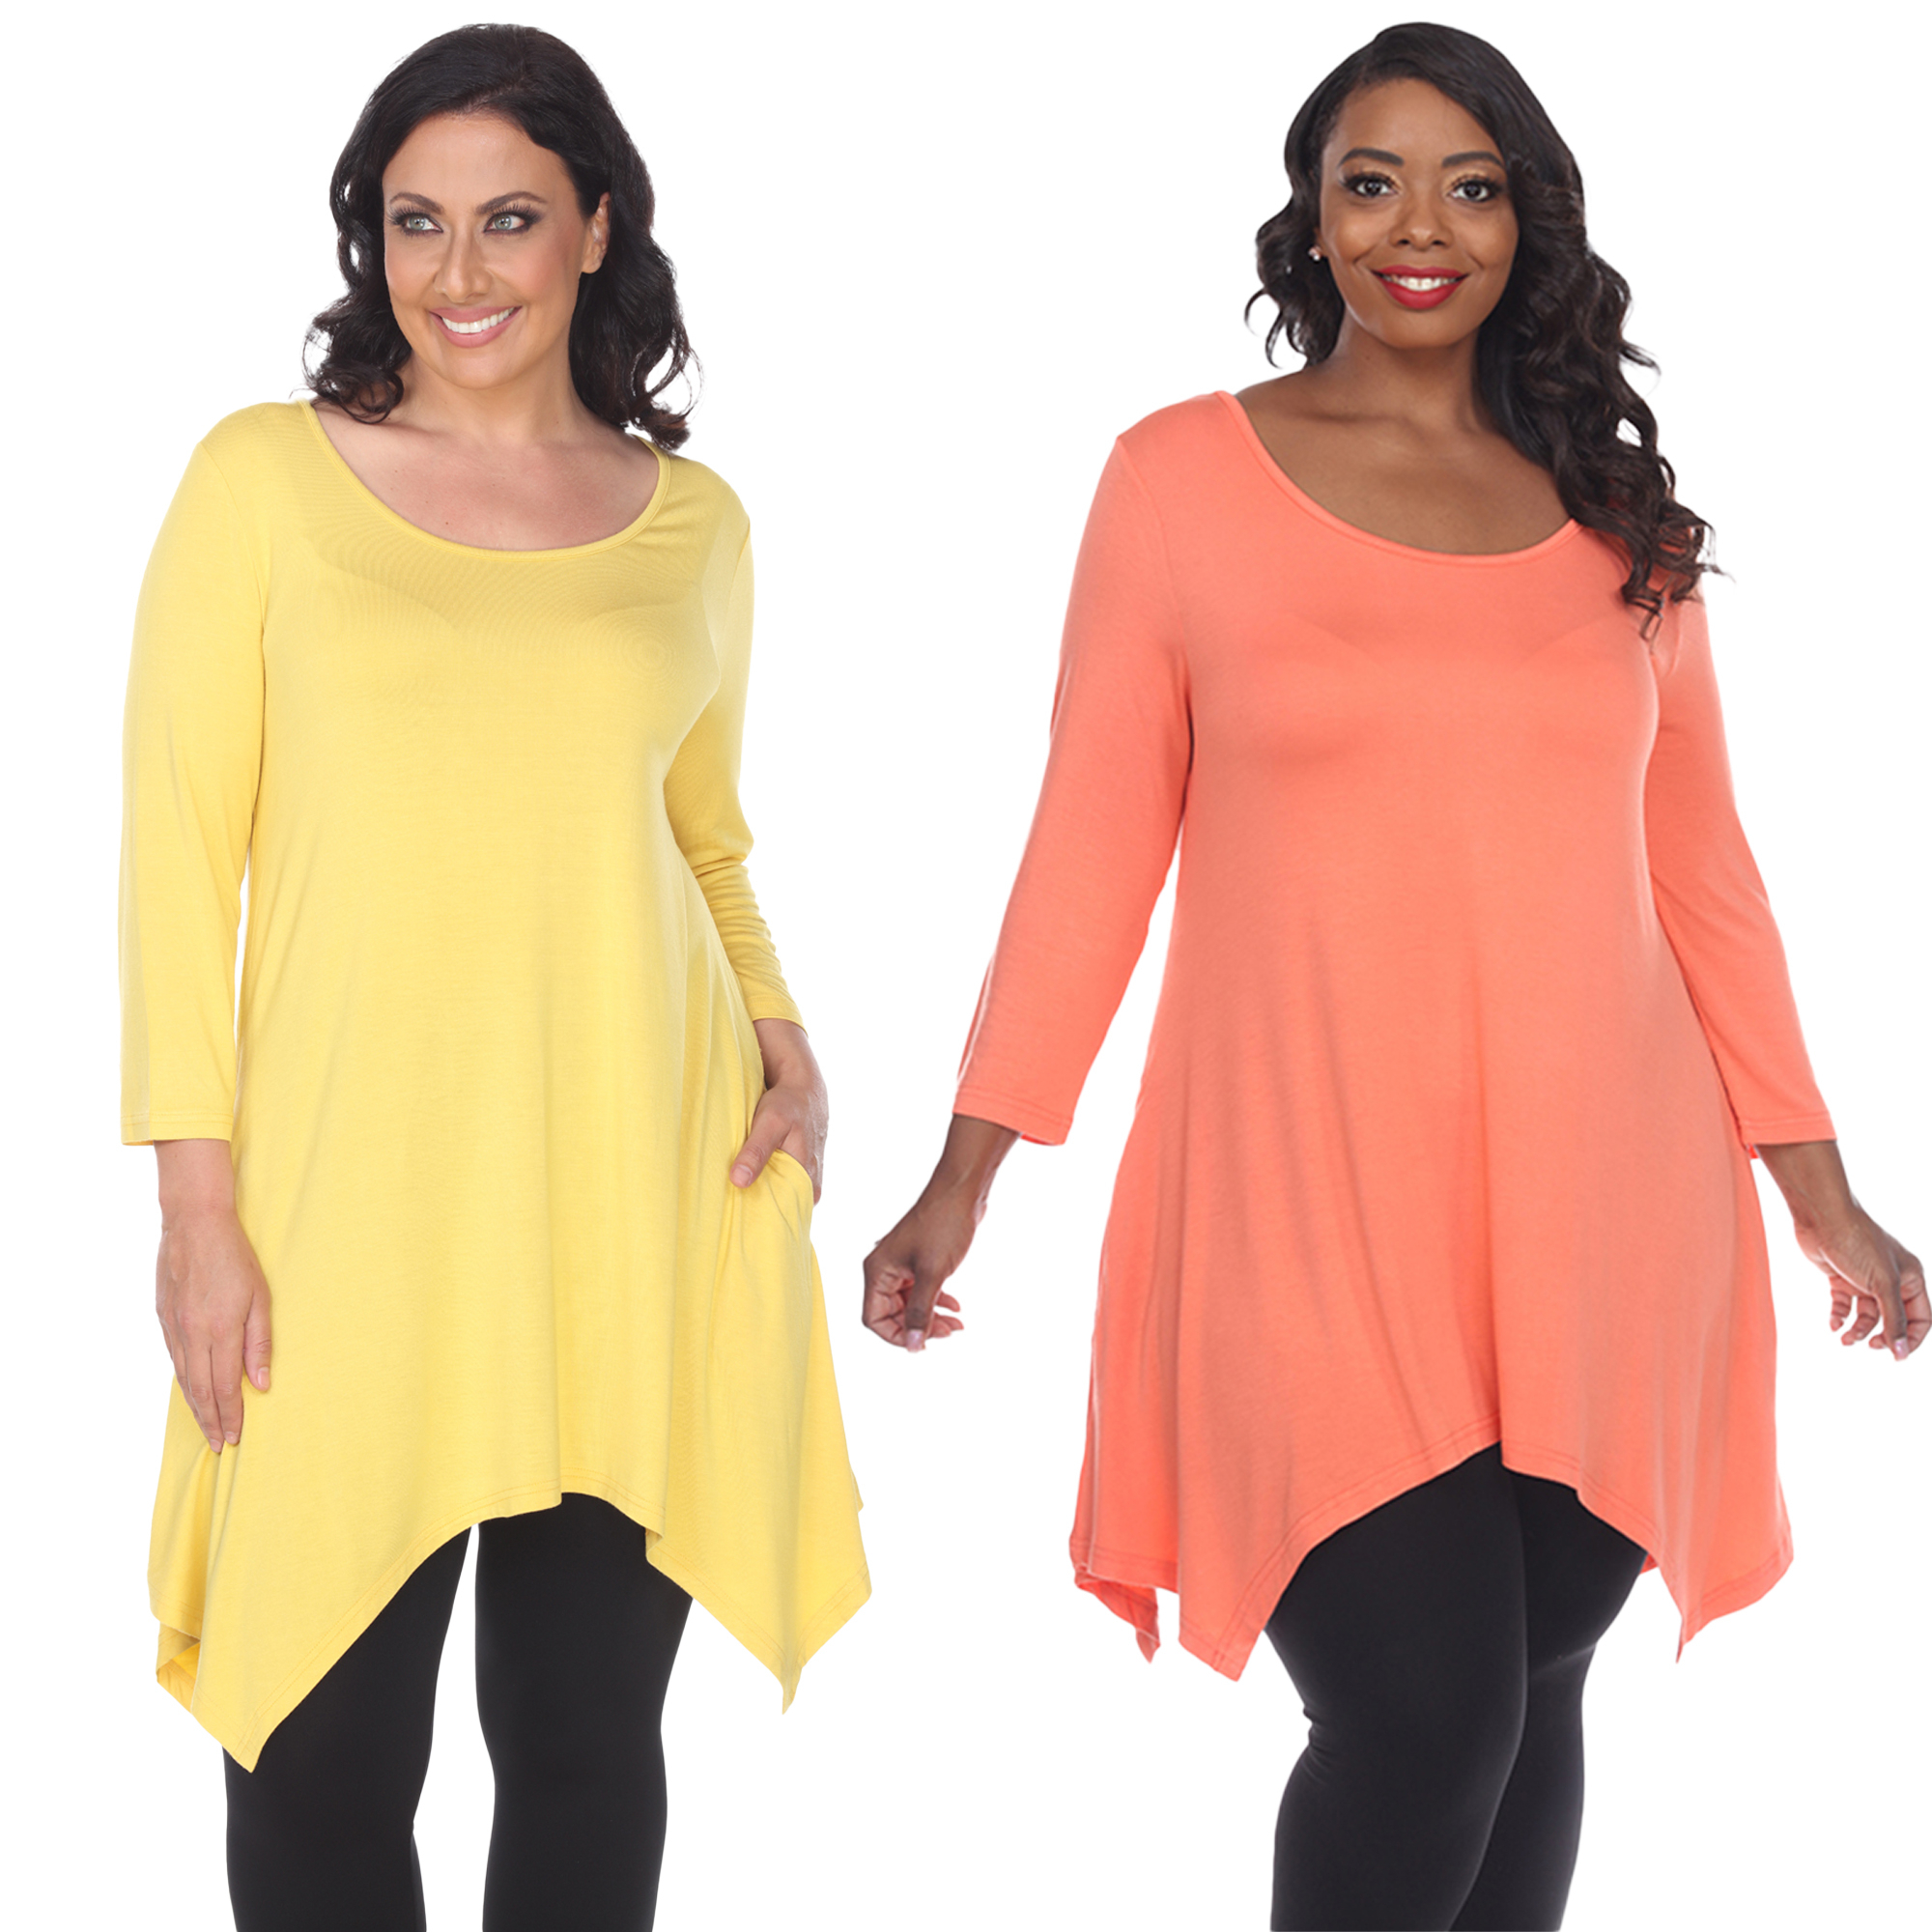 White Mark Women's Pack Of 2 Yellow Tunic Top - Yellow, Coral, 1X